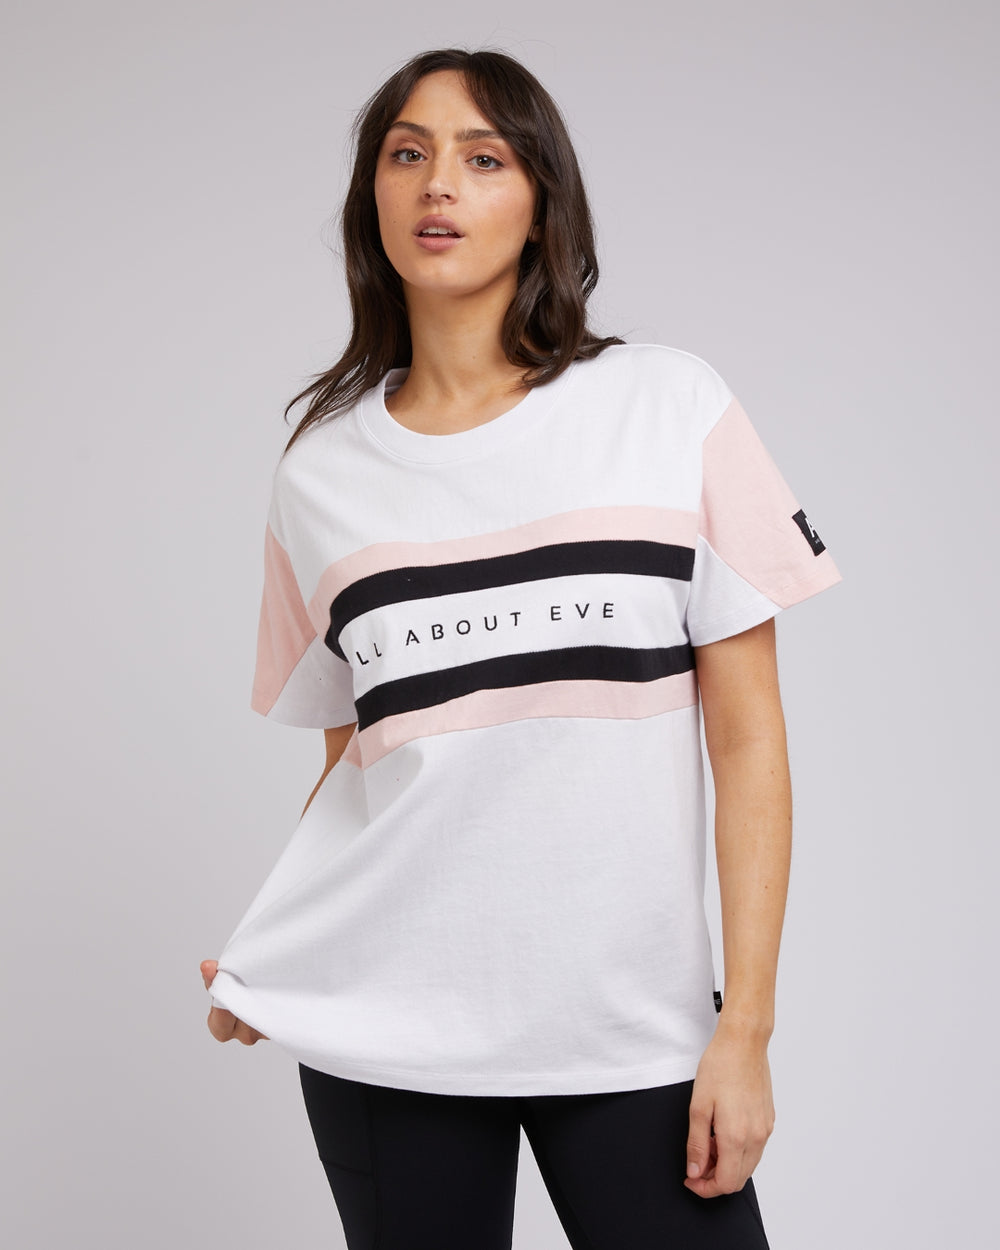 The Base Contrast Tee from All About Eve